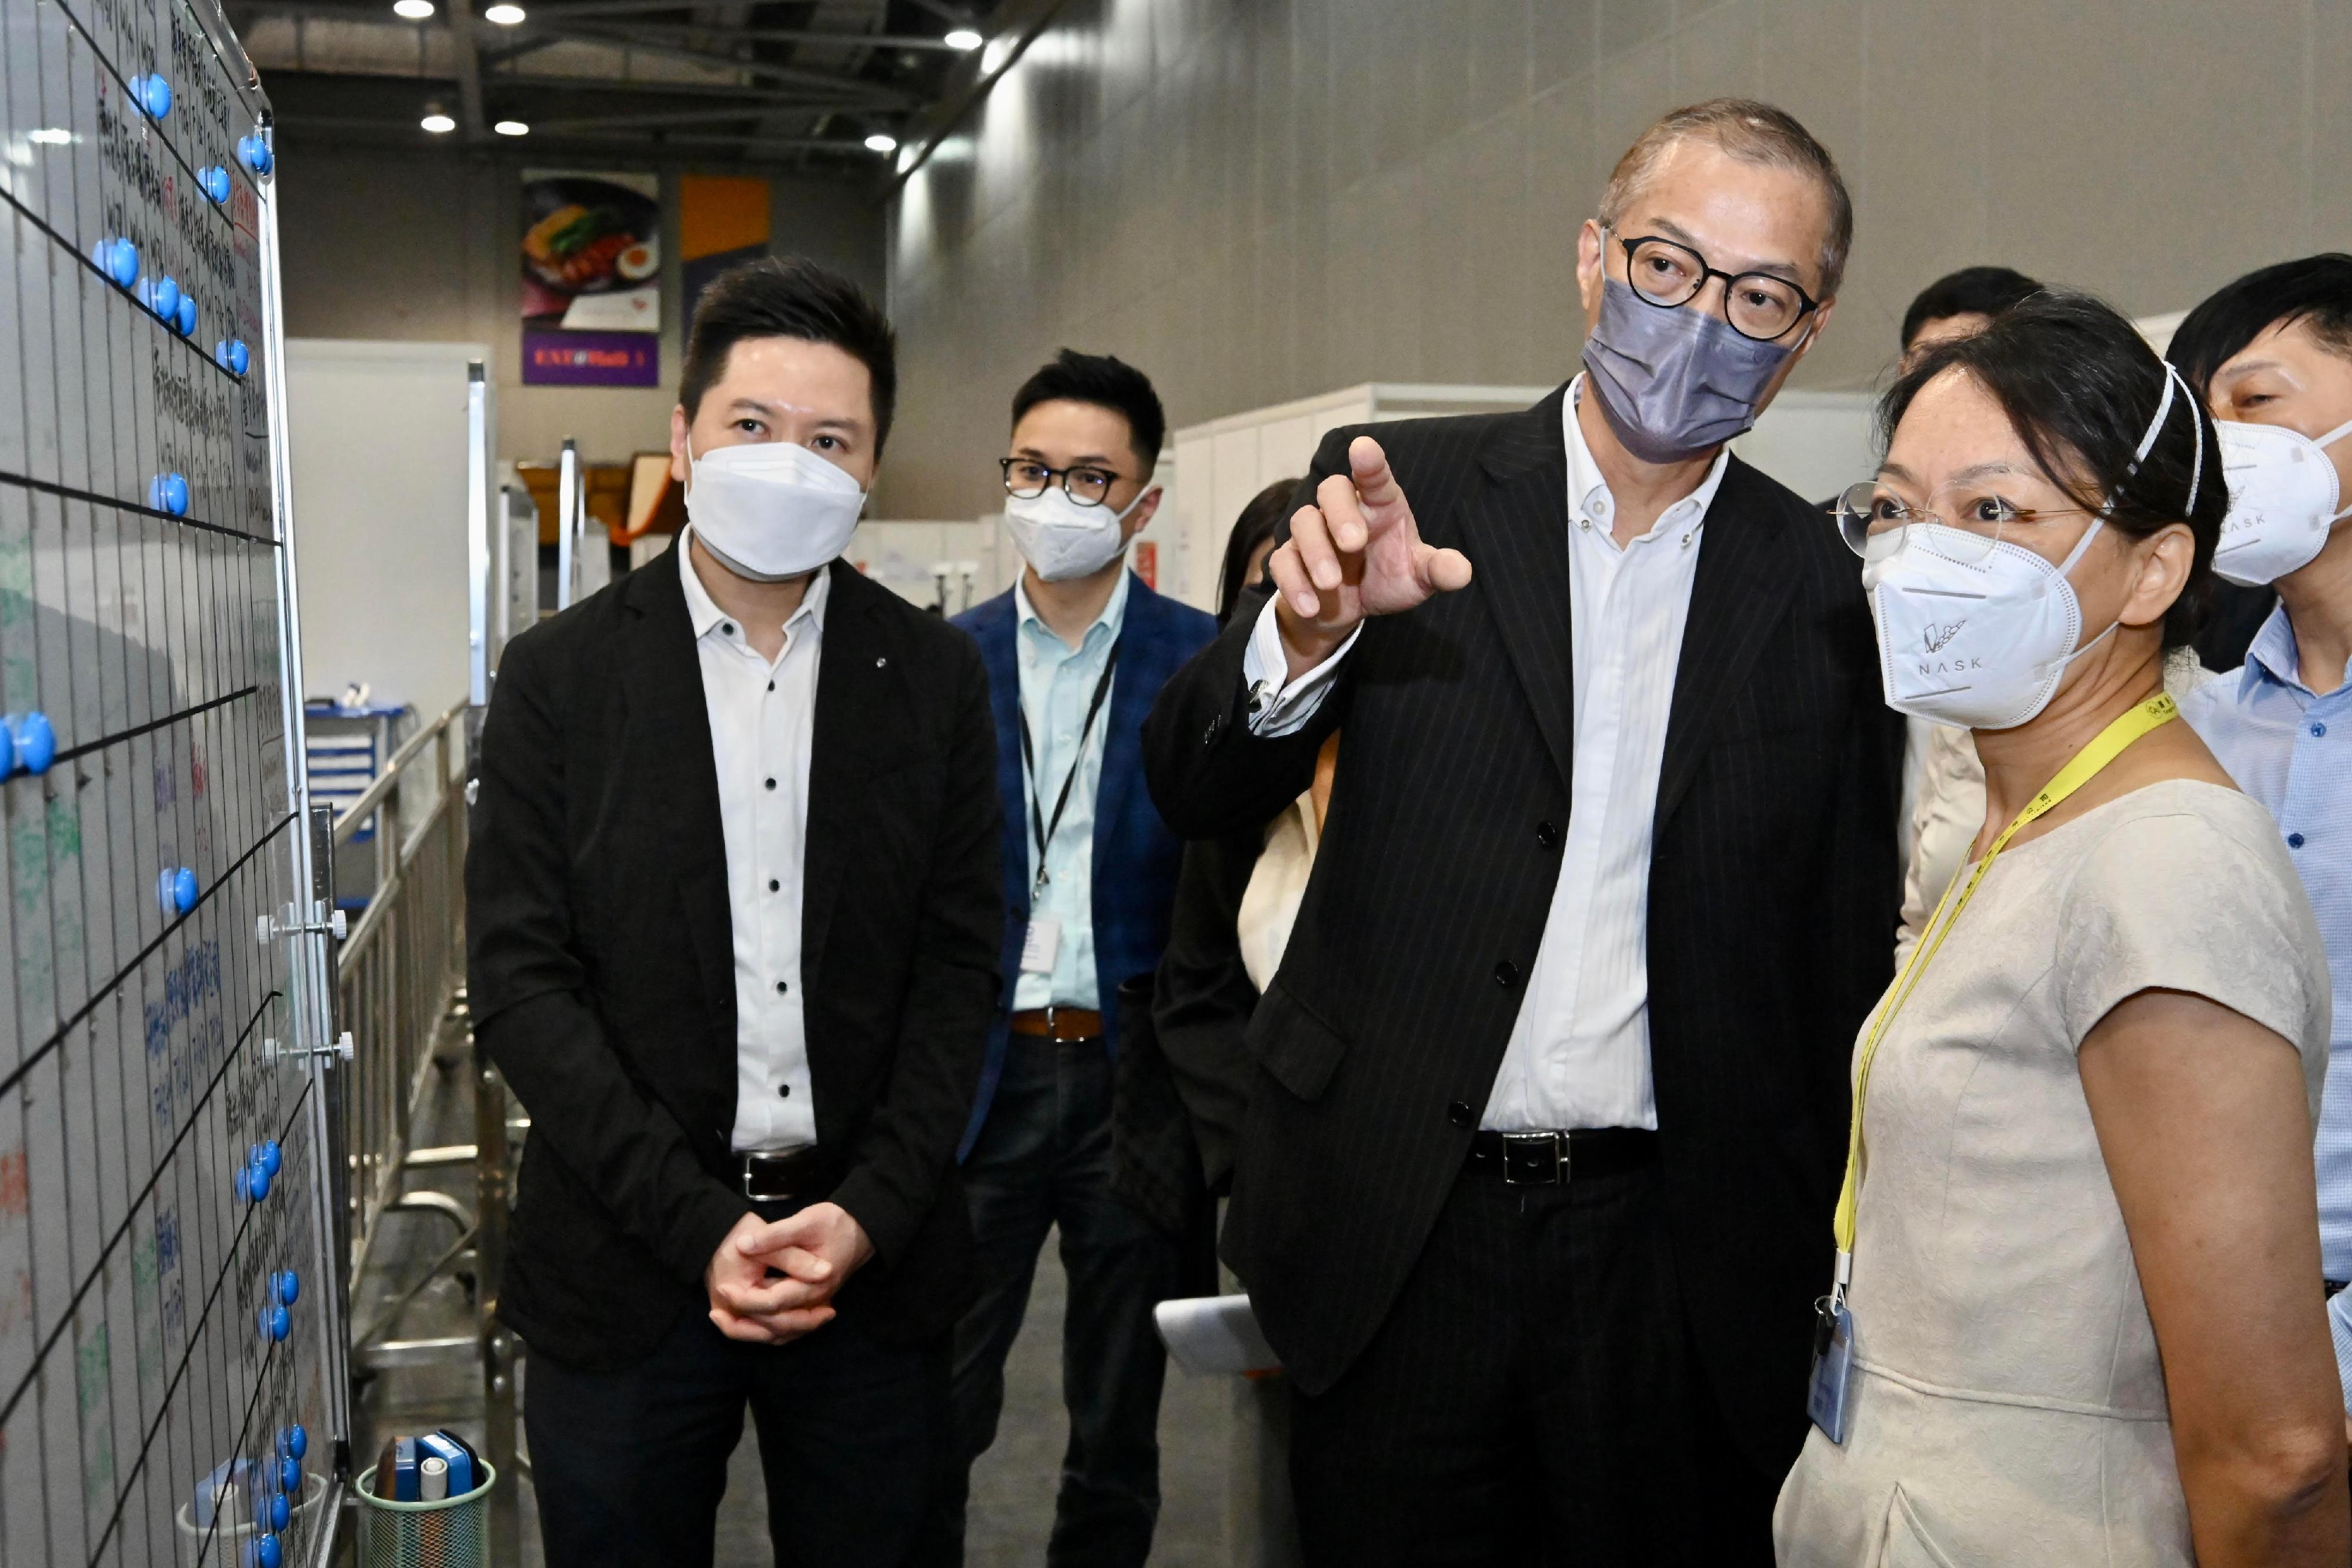 The Secretary for Health, Professor Lo Chung-mau (second right), inspected the Temporary Quarantine Centre for COVID-19 at AsiaWorld-Expo, which is operated by the Social Welfare Department with medical support by the Department of Health, to understand the daily operation of the Centre. Looking on is the Controller, Centre for Health Protection of the Department of Health, Dr Edwin Tsui (first left).